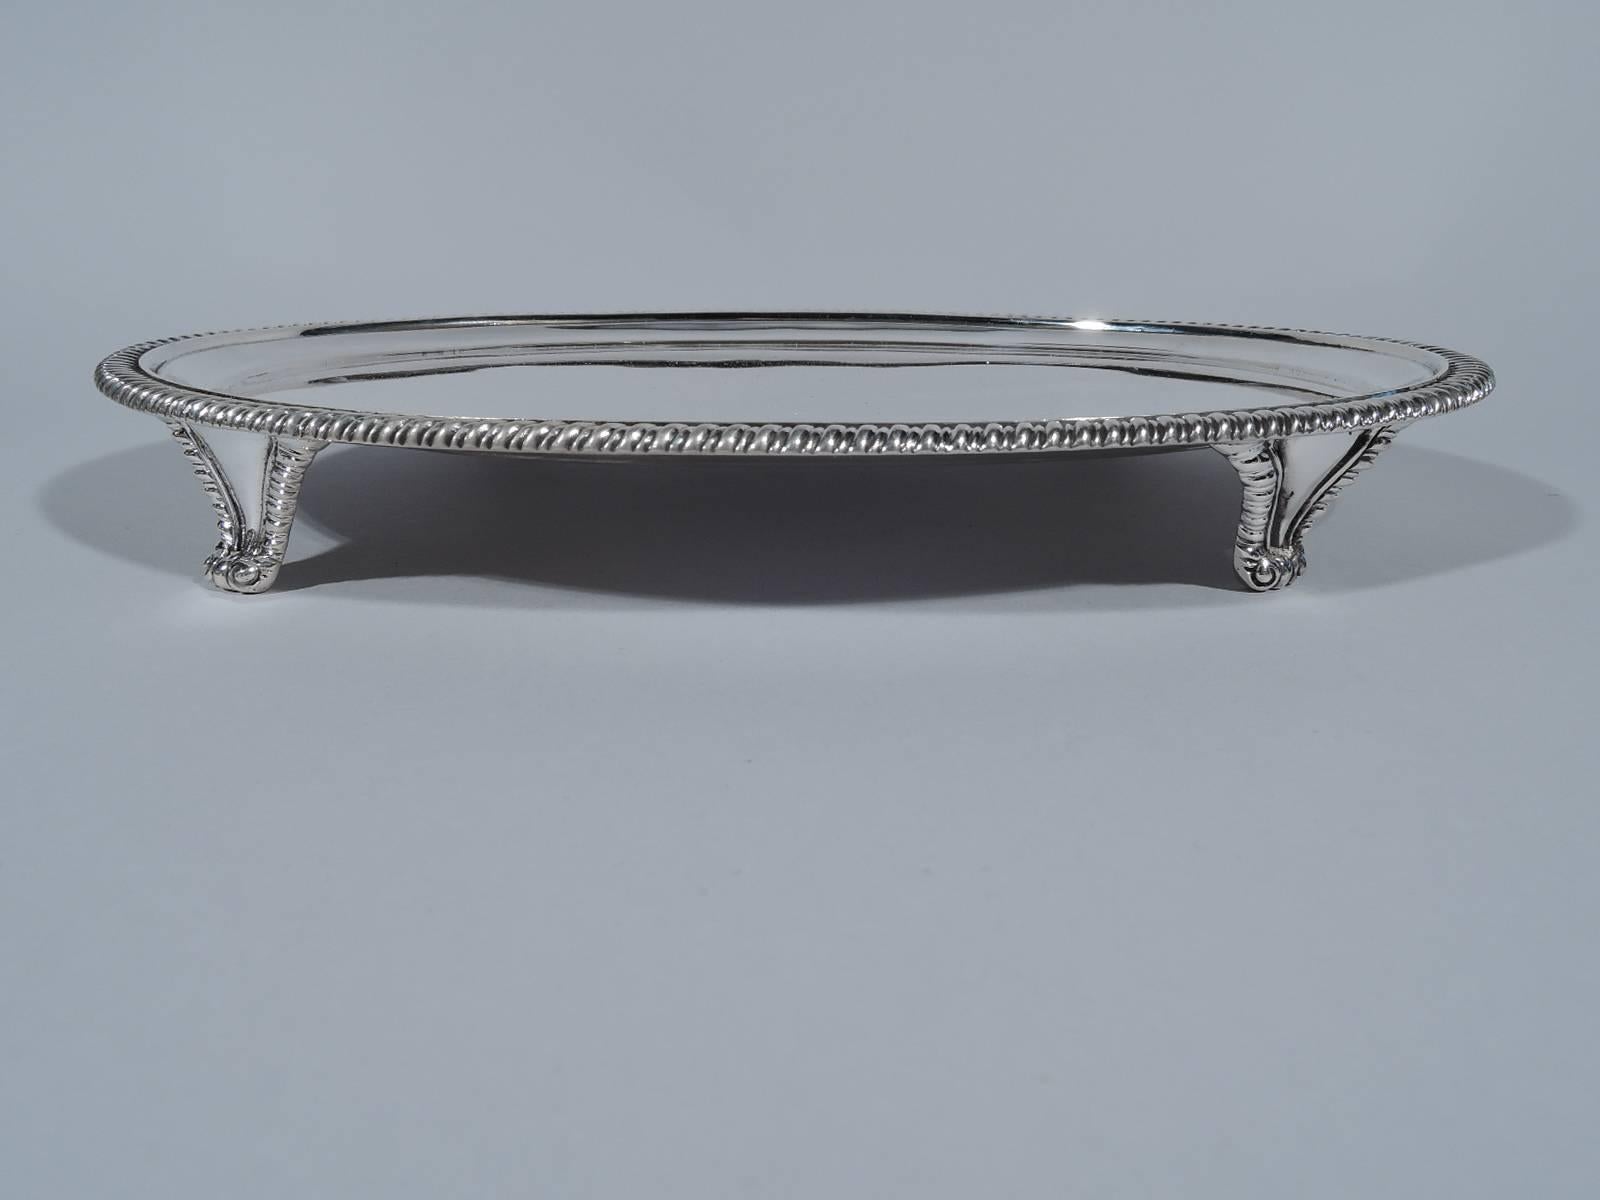 Georgian-style sterling silver salver. Made by Daniel & John Wellby in London in 1910. Oval with gadrooned rim. Rests on four tapering and gadrooned supports terminating in split volute scrolls. Hallmarked. Weight: 20 troy ounces.